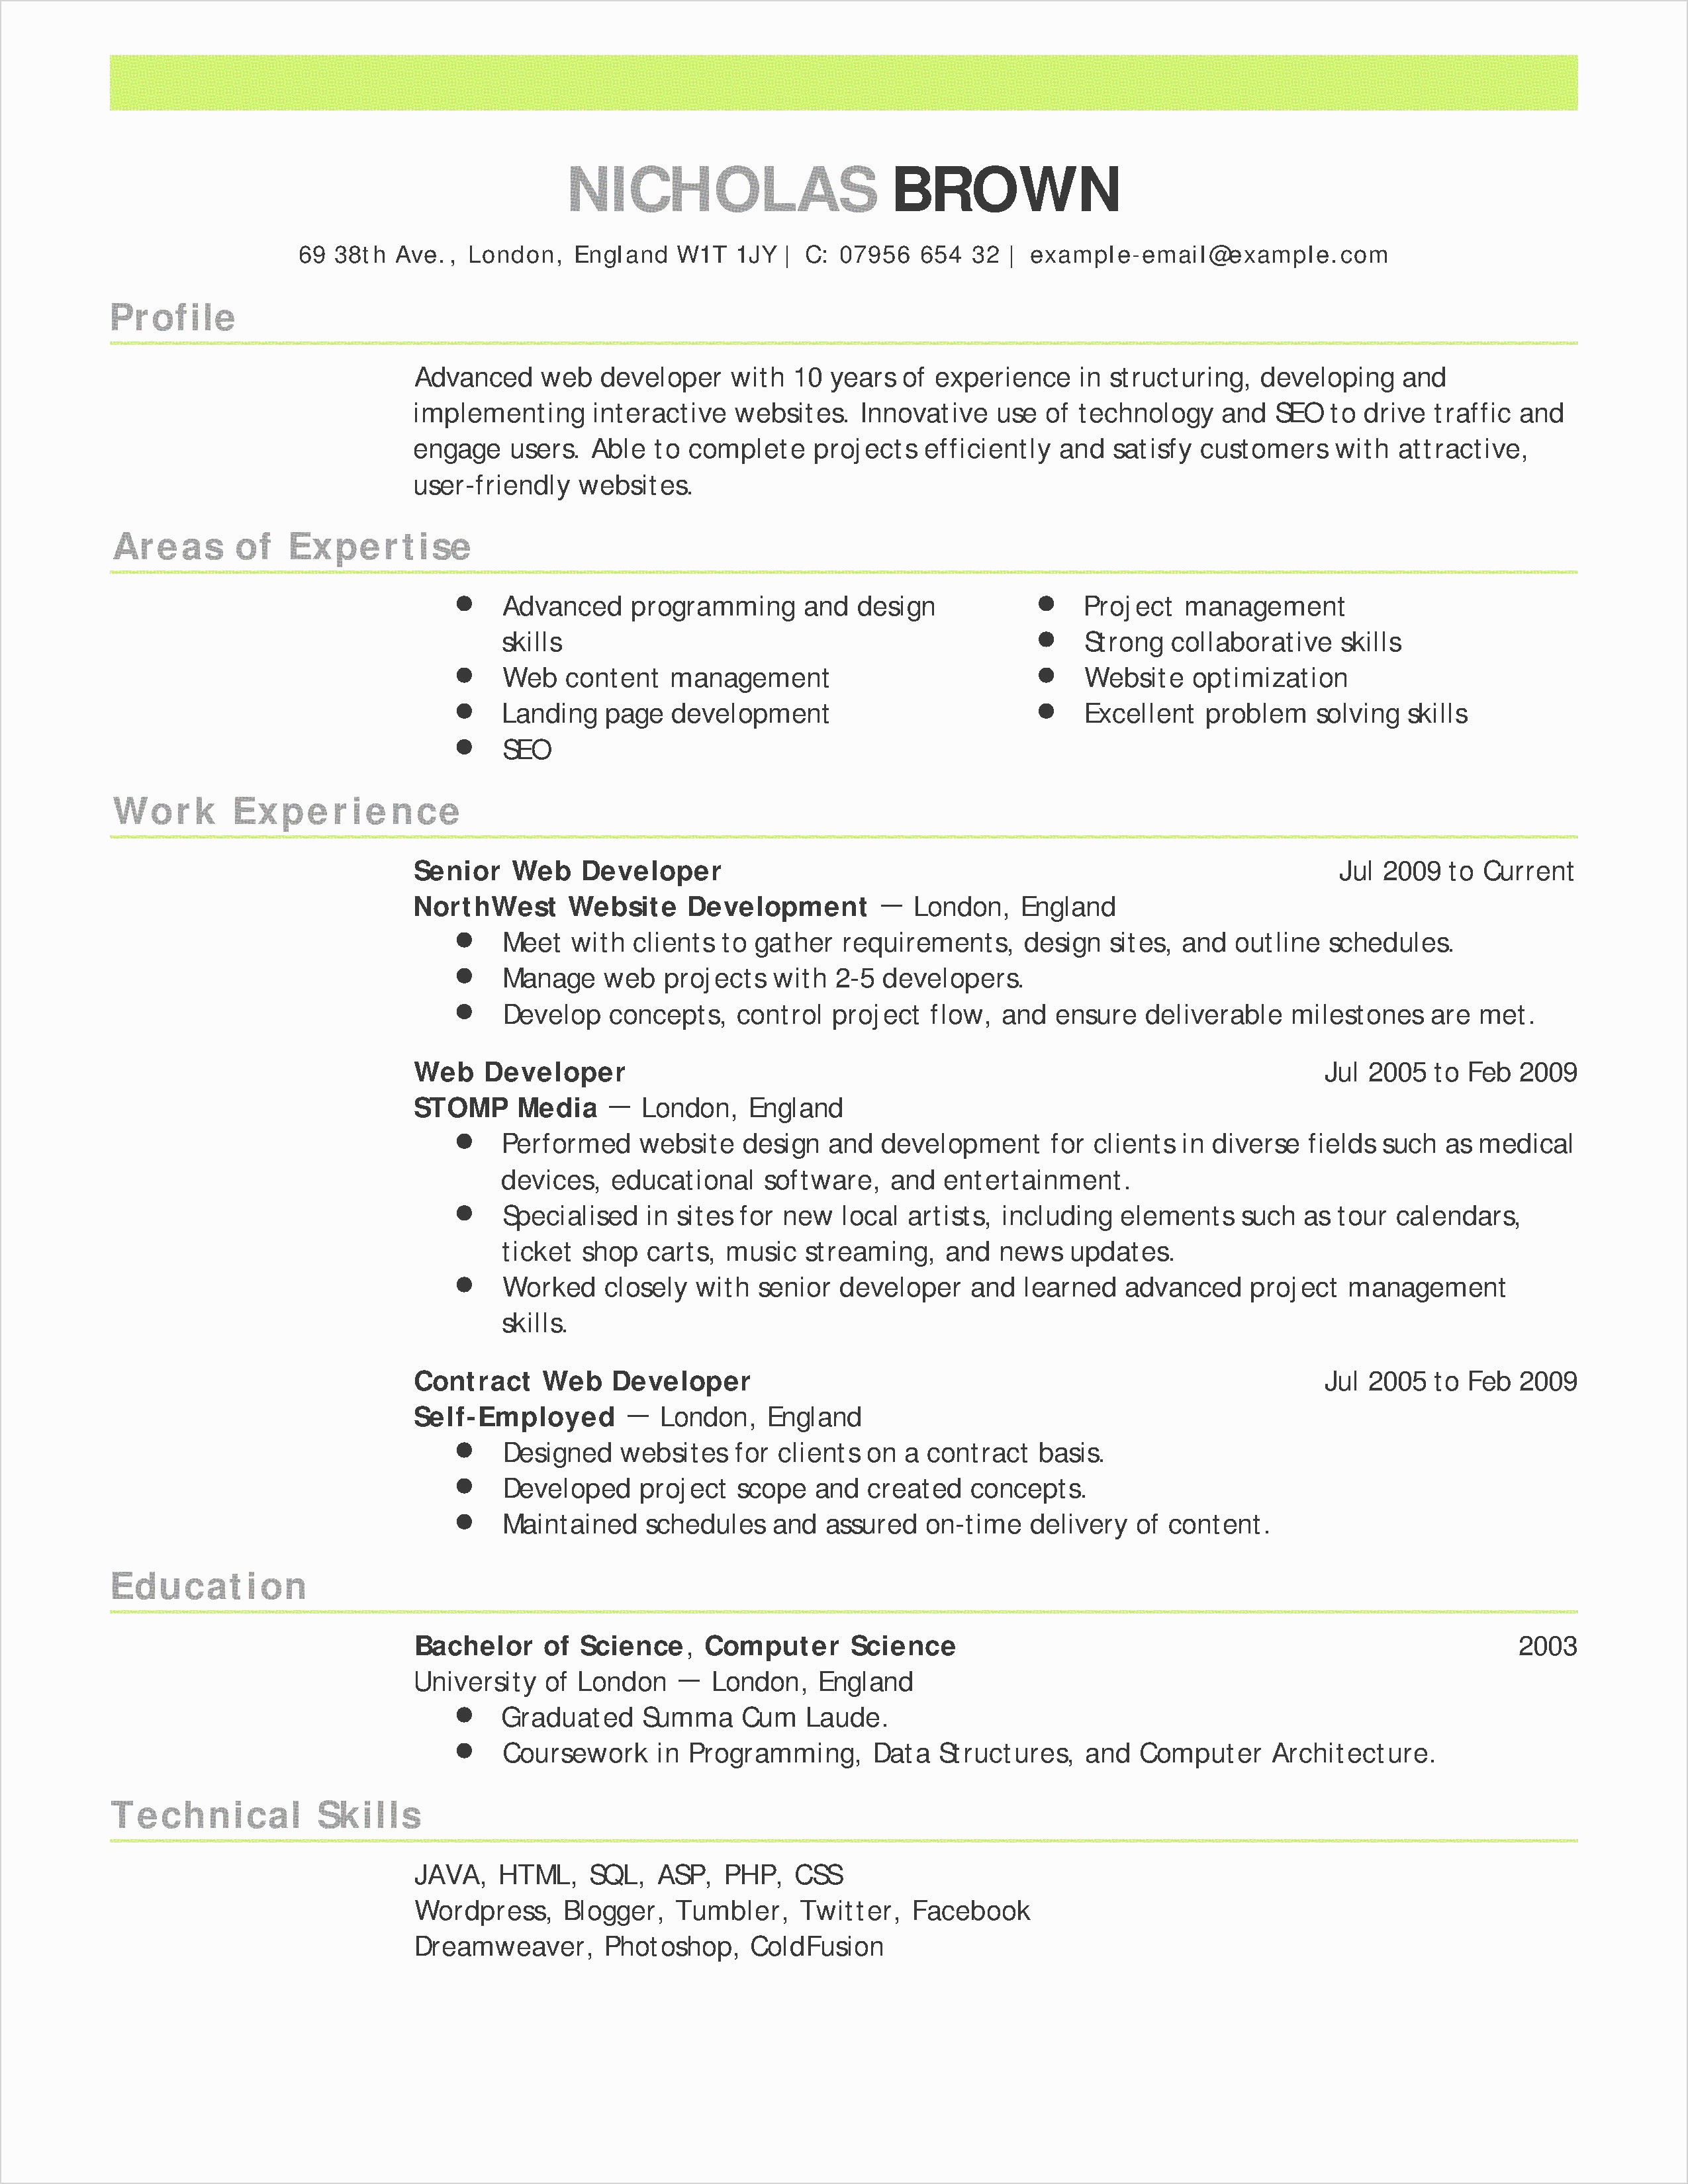 Human Resources Resume Entry Level Human Resources Resume Beautiful Entry Level Web